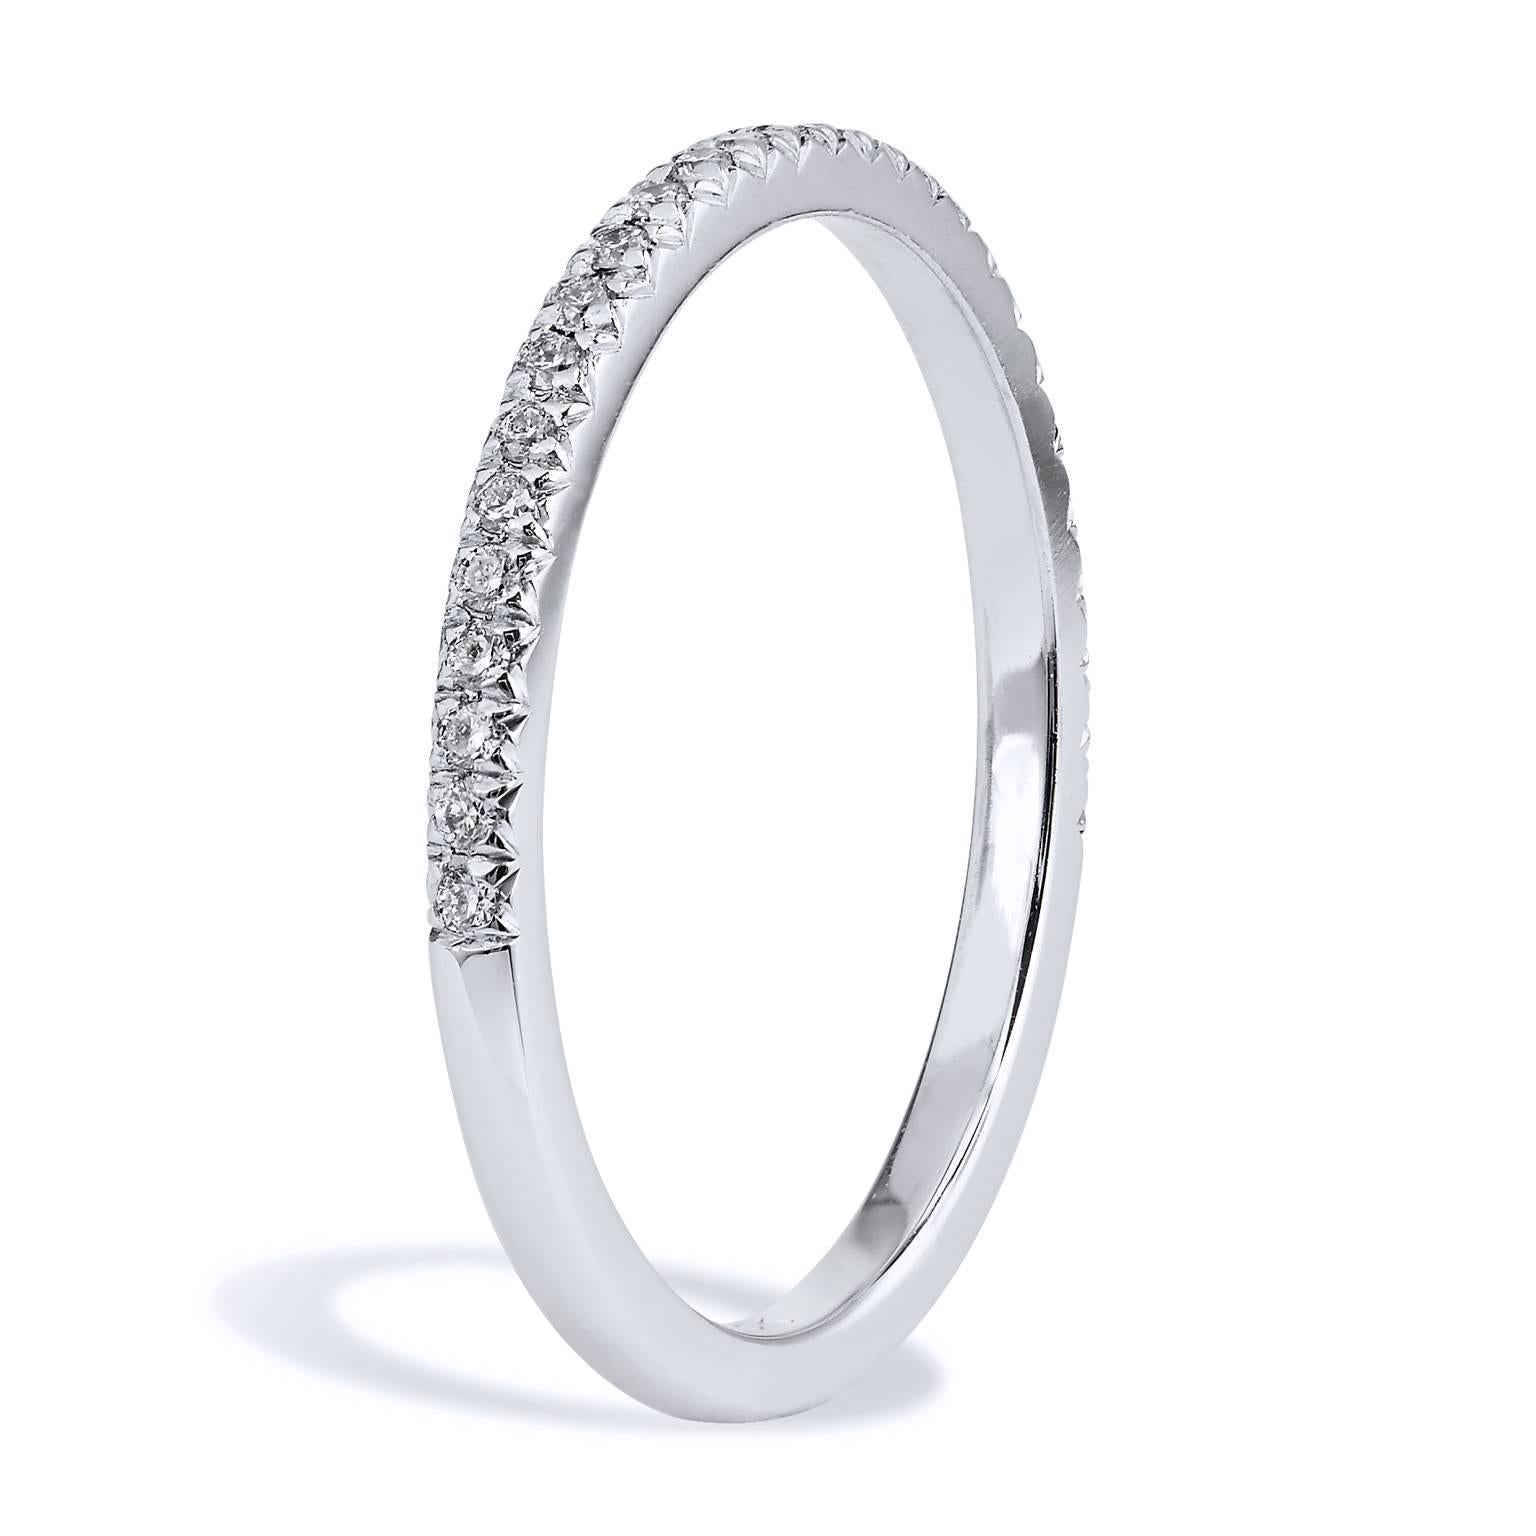 This diamond band ring features twenty-seven pieces of diamond pave set with a total weight of 0.11 carat (G/H/VS). Affixed to a 1.50 mm 18 karat white palladium band, the split V detail, opens the eye, allows the ring to pop with light.